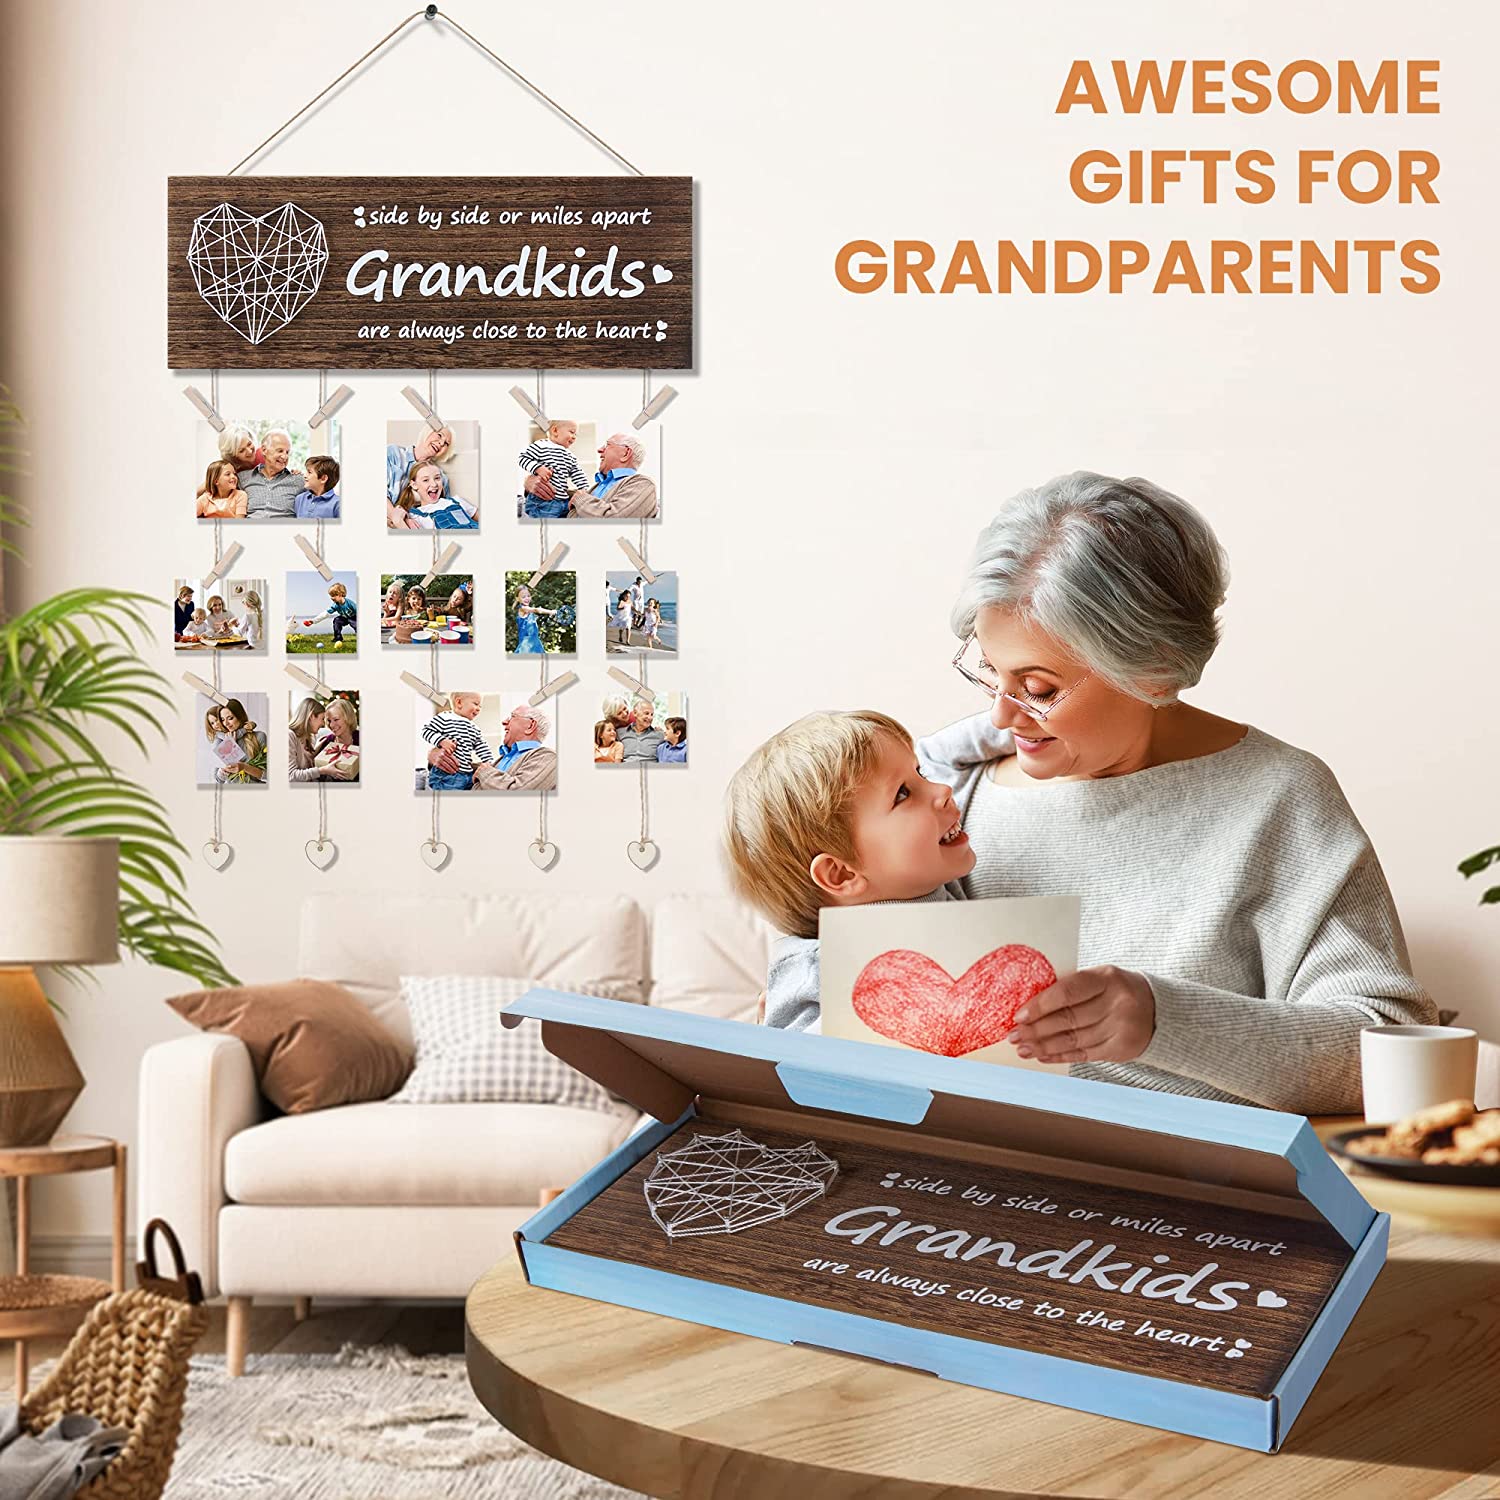 GIFTAGIRL Gifts for Grandparents Who Have Everything - Great Grandparents  Gifts from Grandkids or Grandma and Grandpa Gifts. A Cheeky but Fun Grandparents  Gift. Mugs - Glasses Not Included: Buy Online at